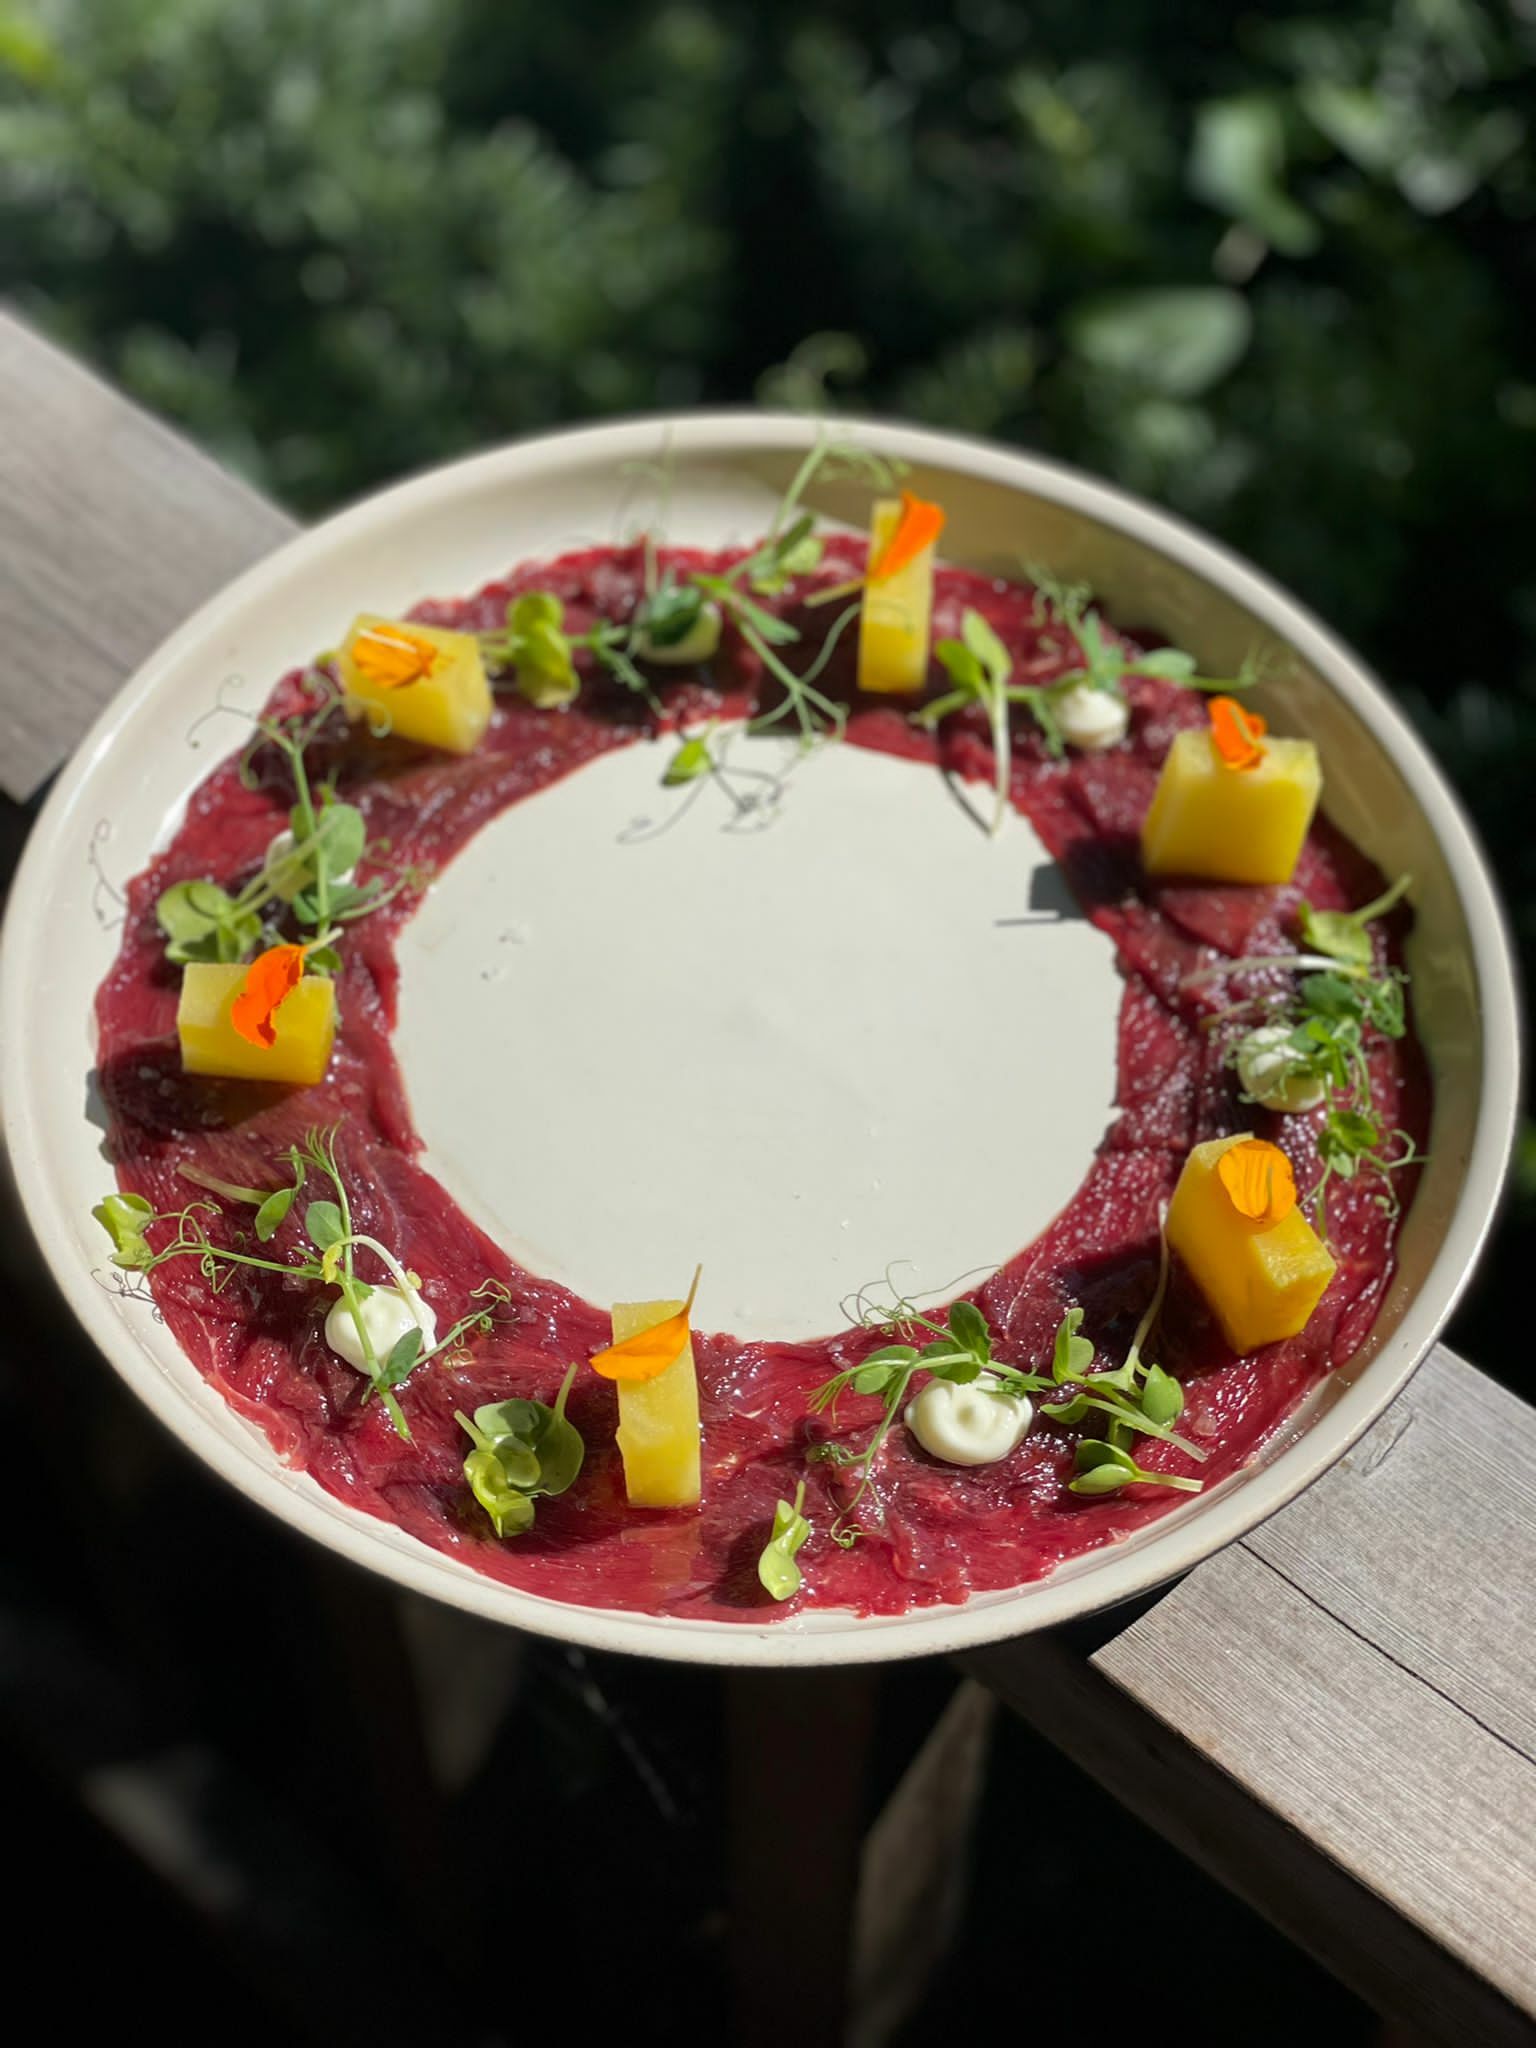 Jumping Carpaccio, featuring kangaroo, caviar and cucumber air, as part of the R.AIRE dining experience at The Hampton Maid in Hampton Bays.